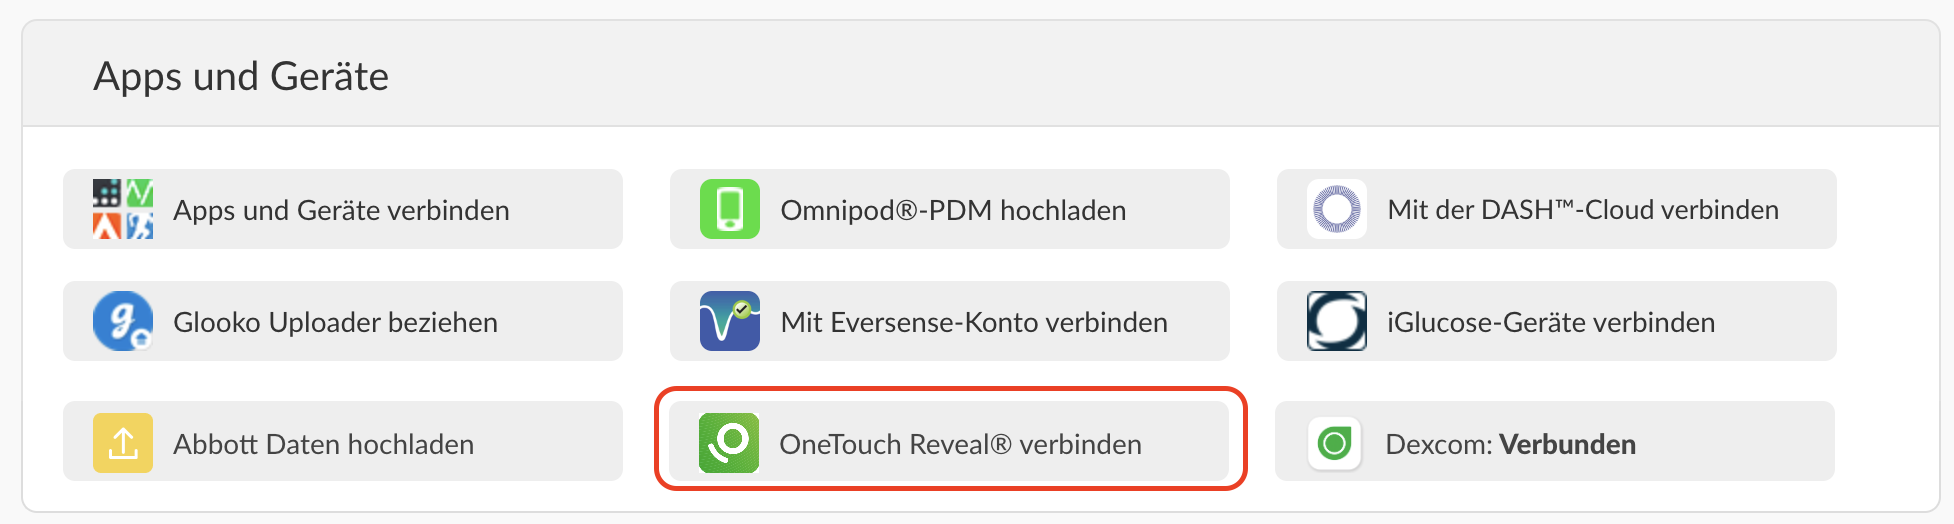 german-web-connectonetouch.png